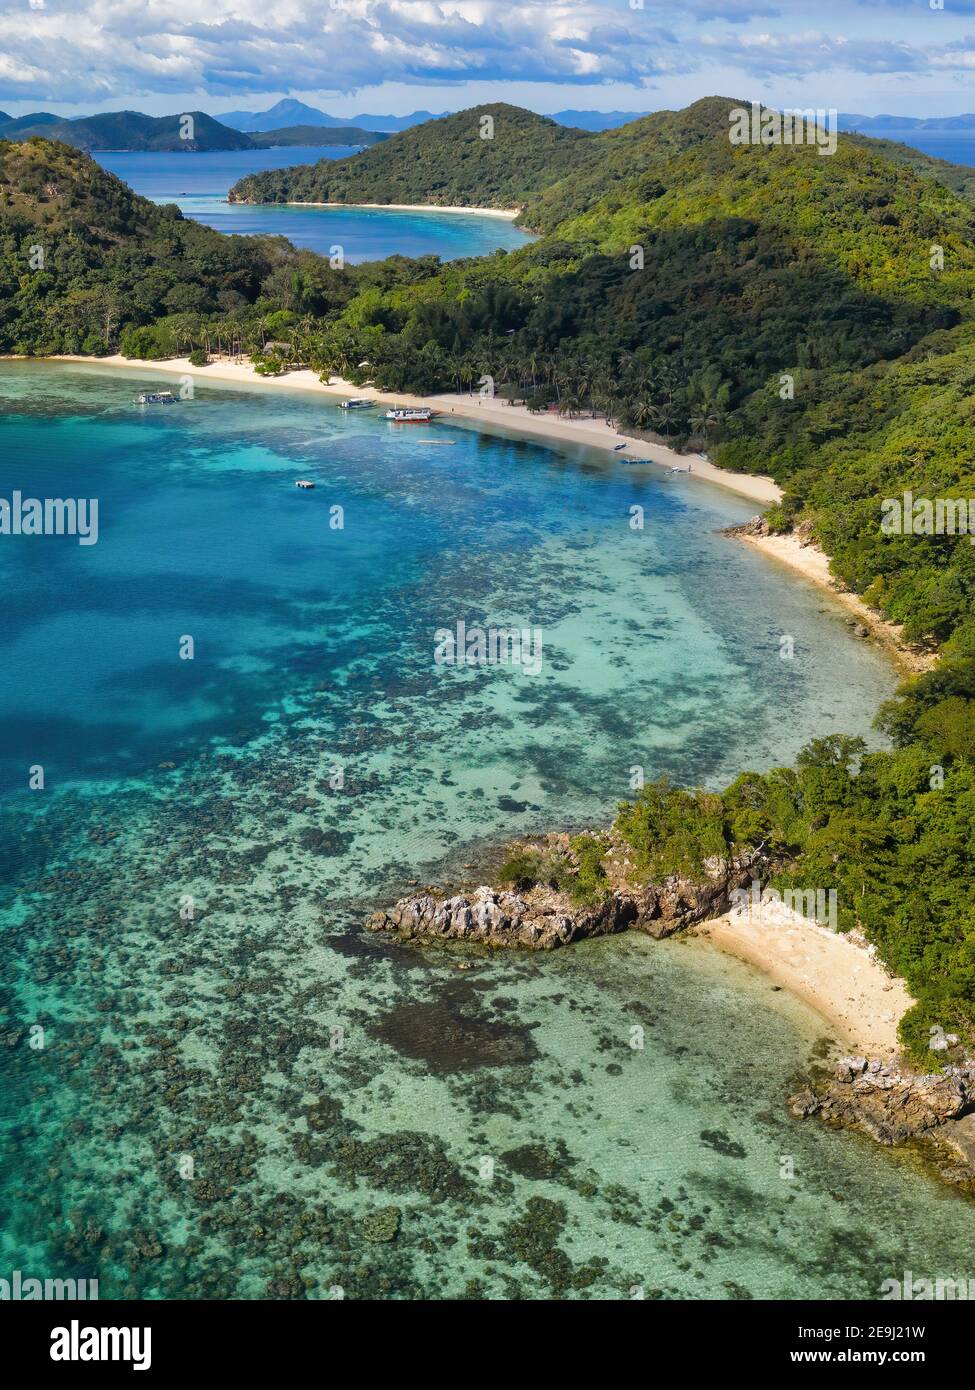 Aerial view taken with  a drone of Island Hopping destination known as Coco Beach, Coron, Palawan, Philippines Stock Photo